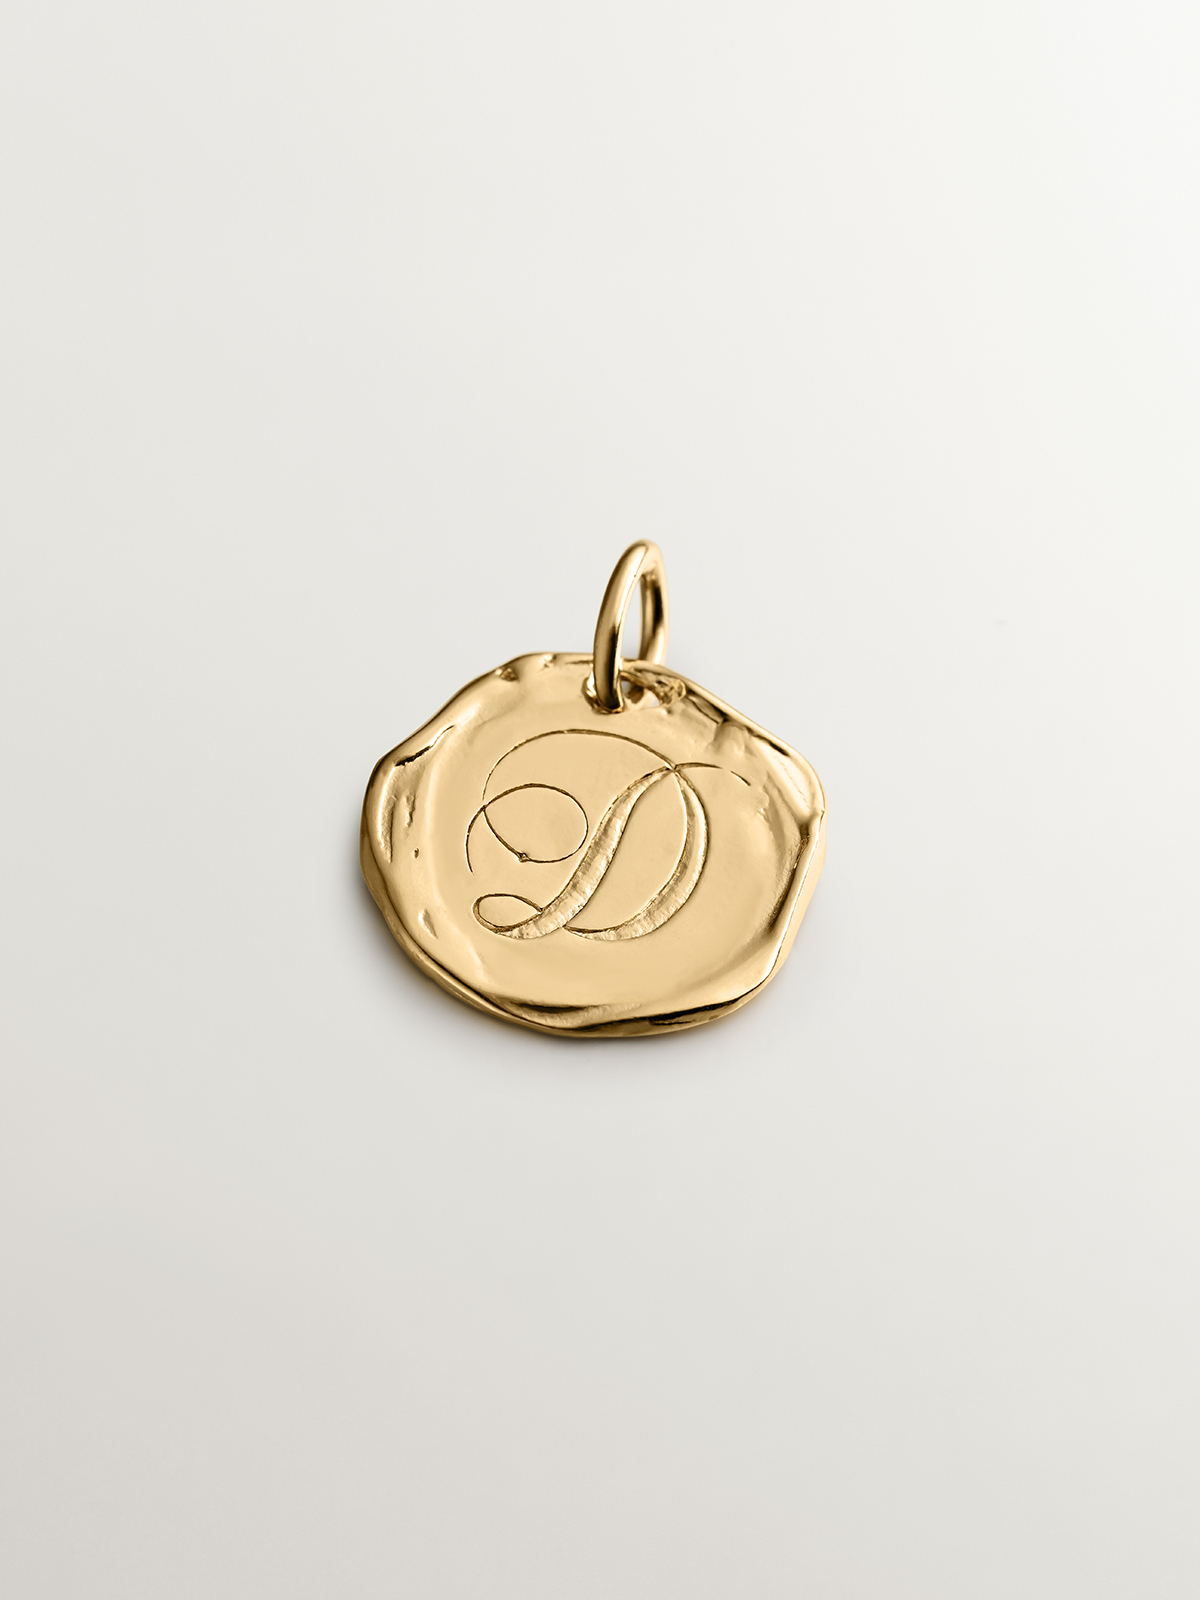 Handmade 925 silver charm plated in 18K yellow gold with initial D